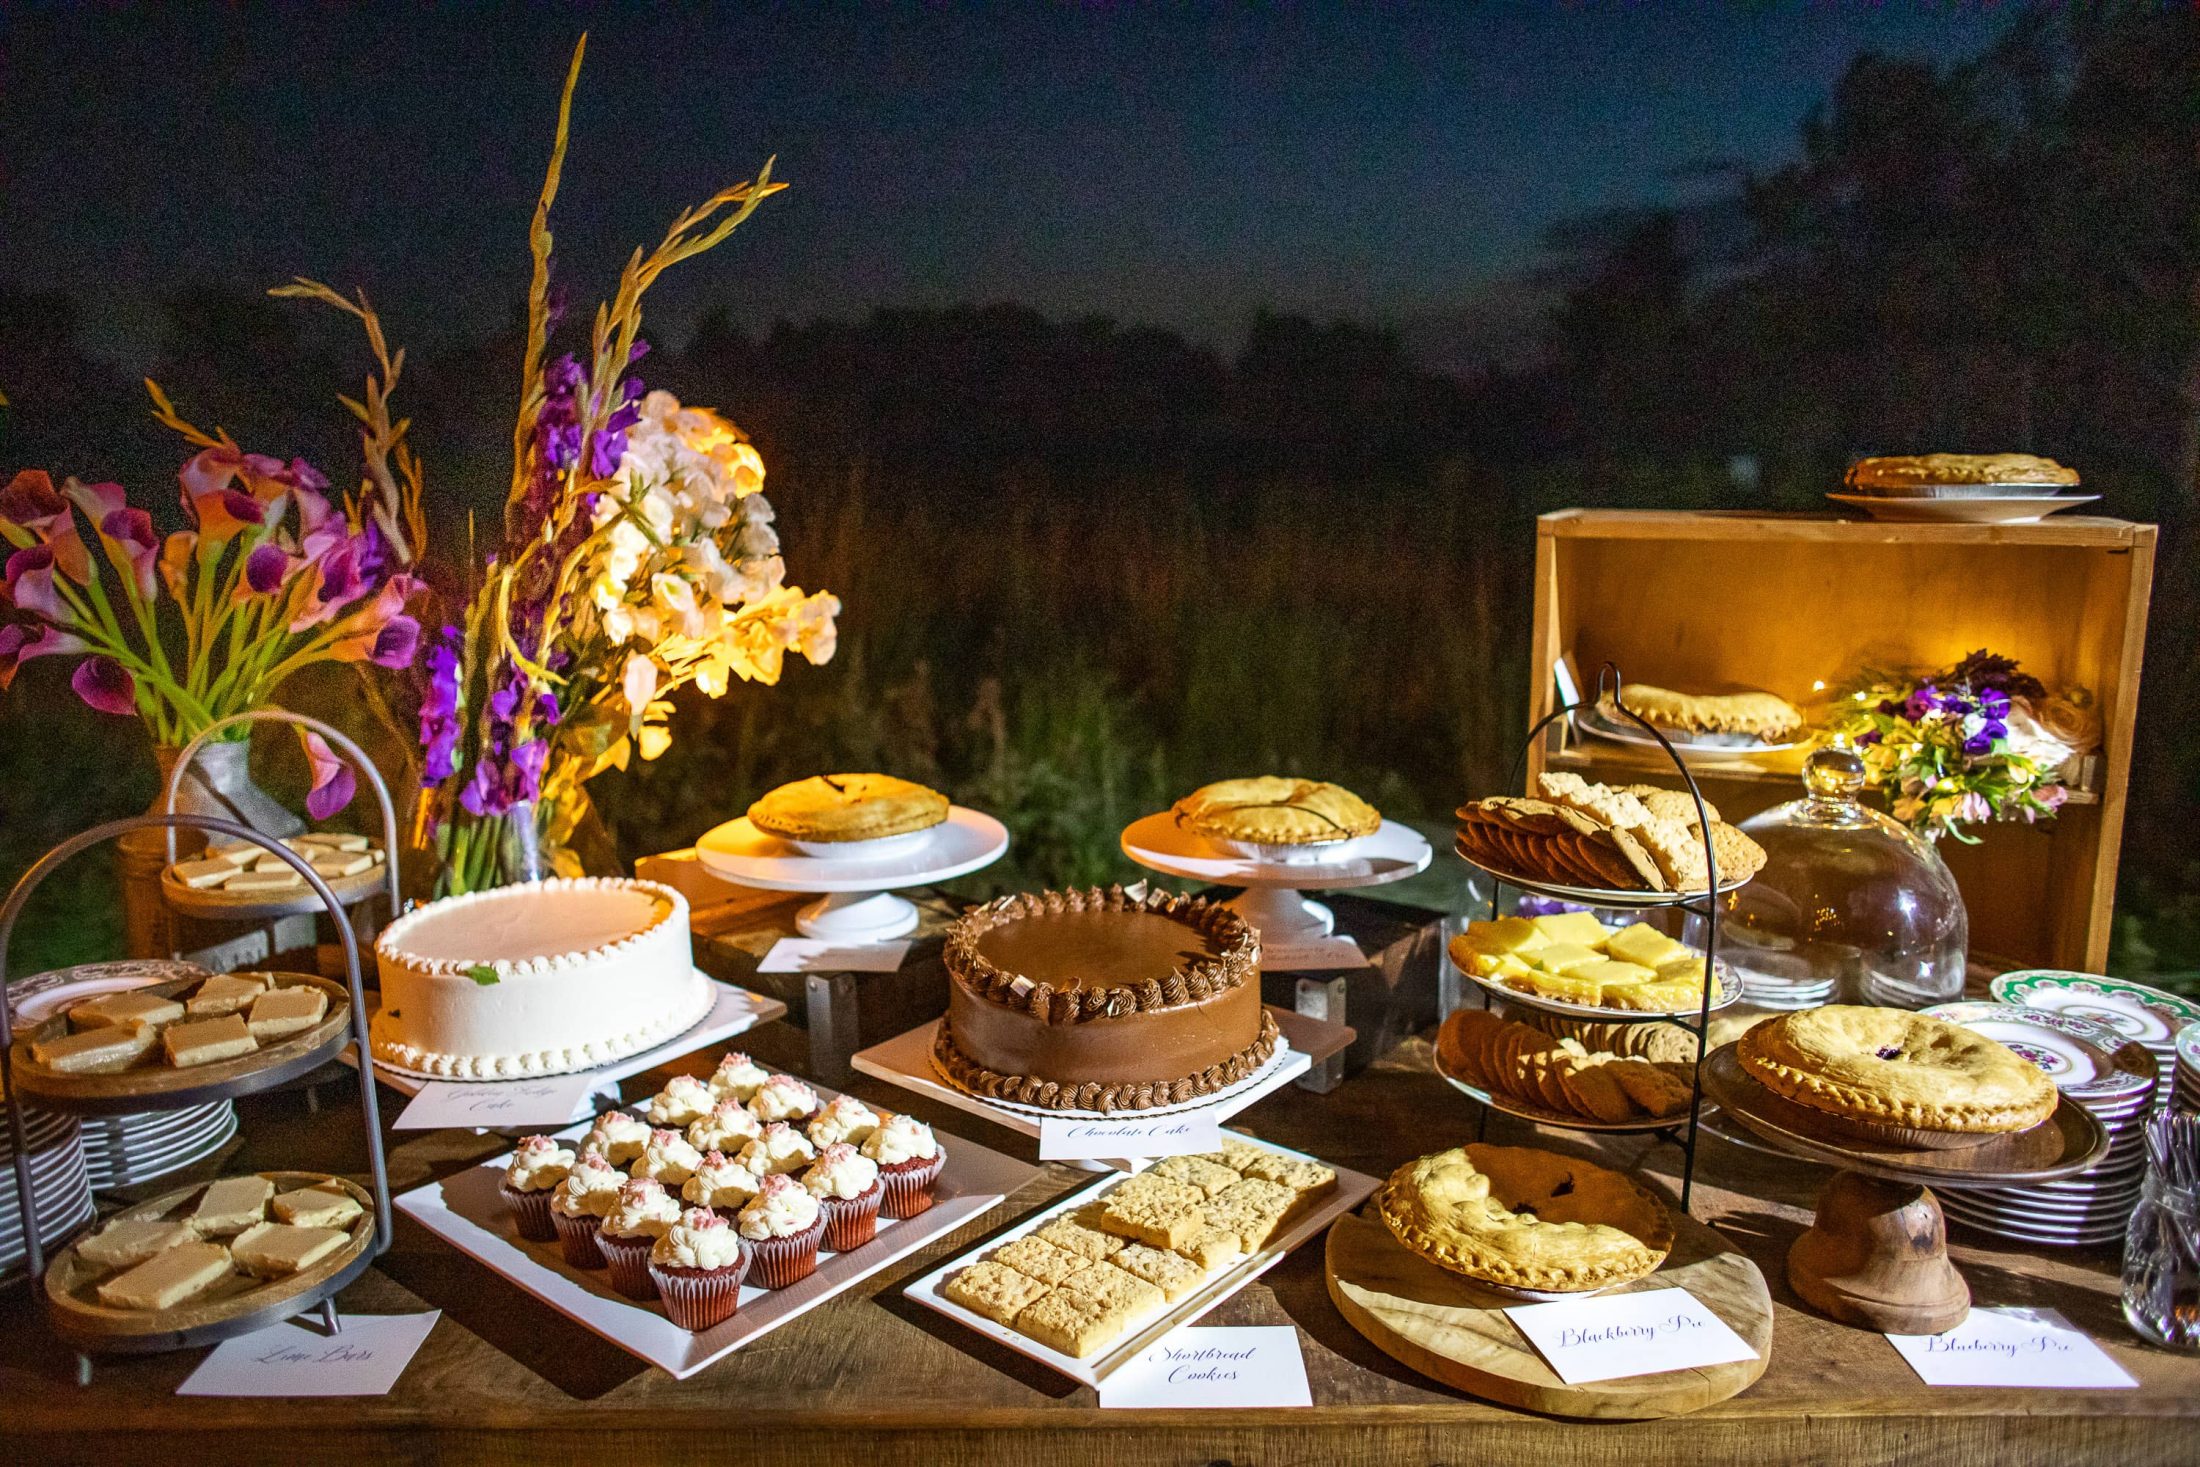 Dessert table of pies and cakes at this Hamptons wedding weekend held at The Parrish Museum | Photo by Roey Yohai Studio